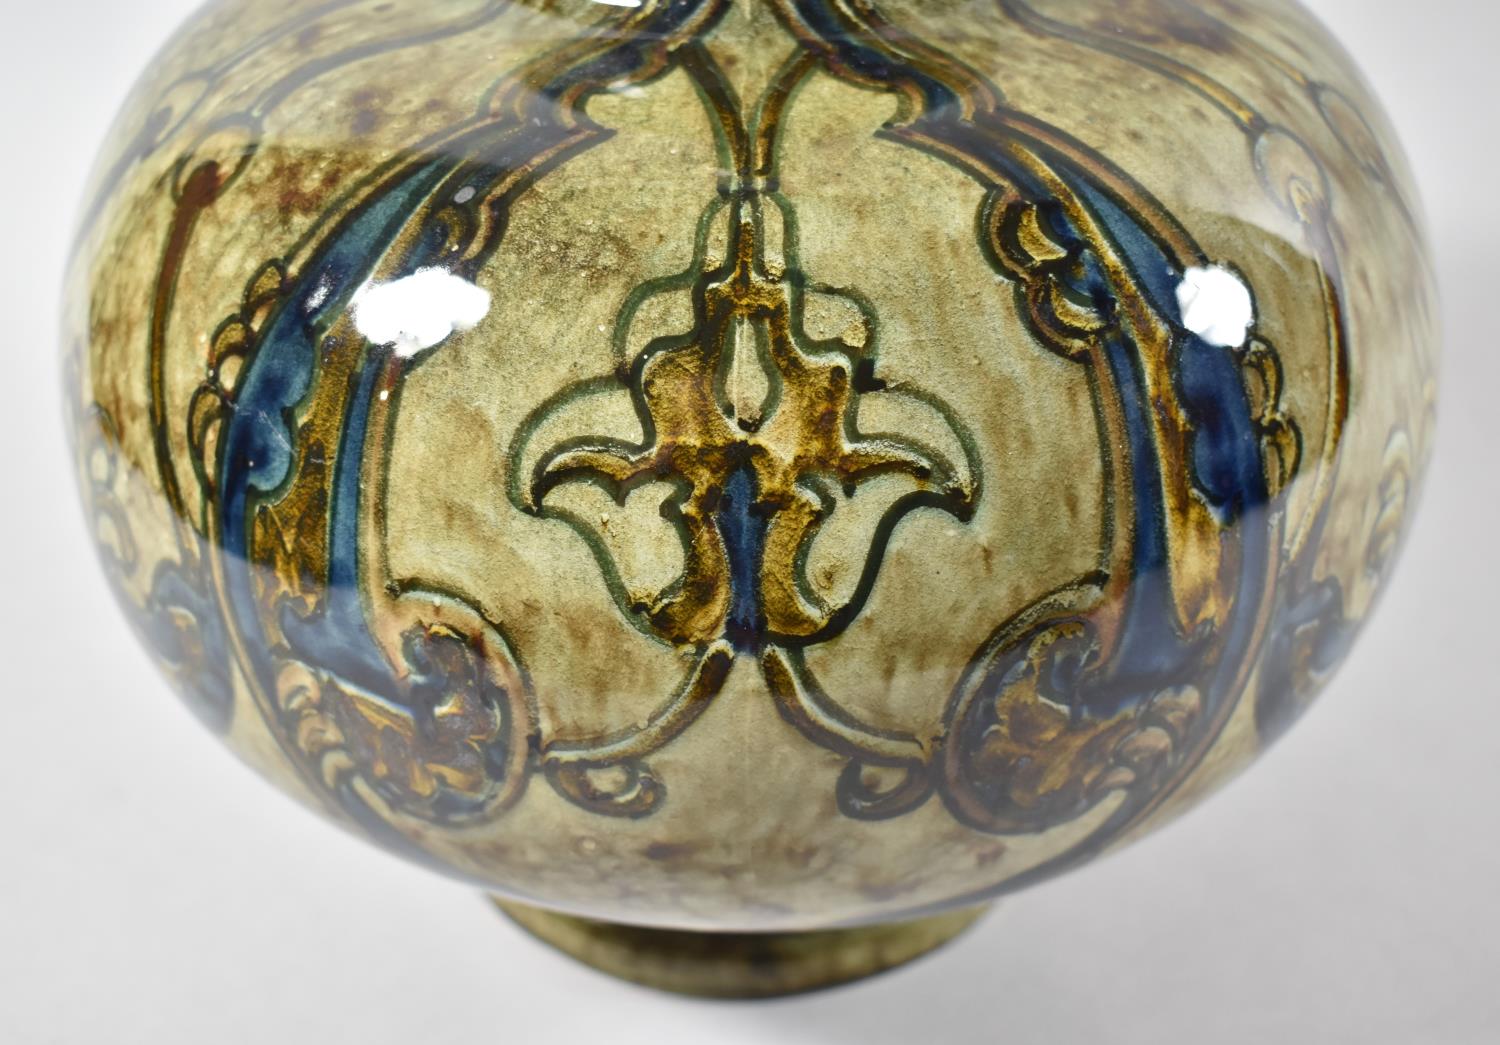 A Rozenburg Den Haag Dutch Earthenware Glazed Vase of Globular Form with Tapering Neck Painted in - Image 3 of 3